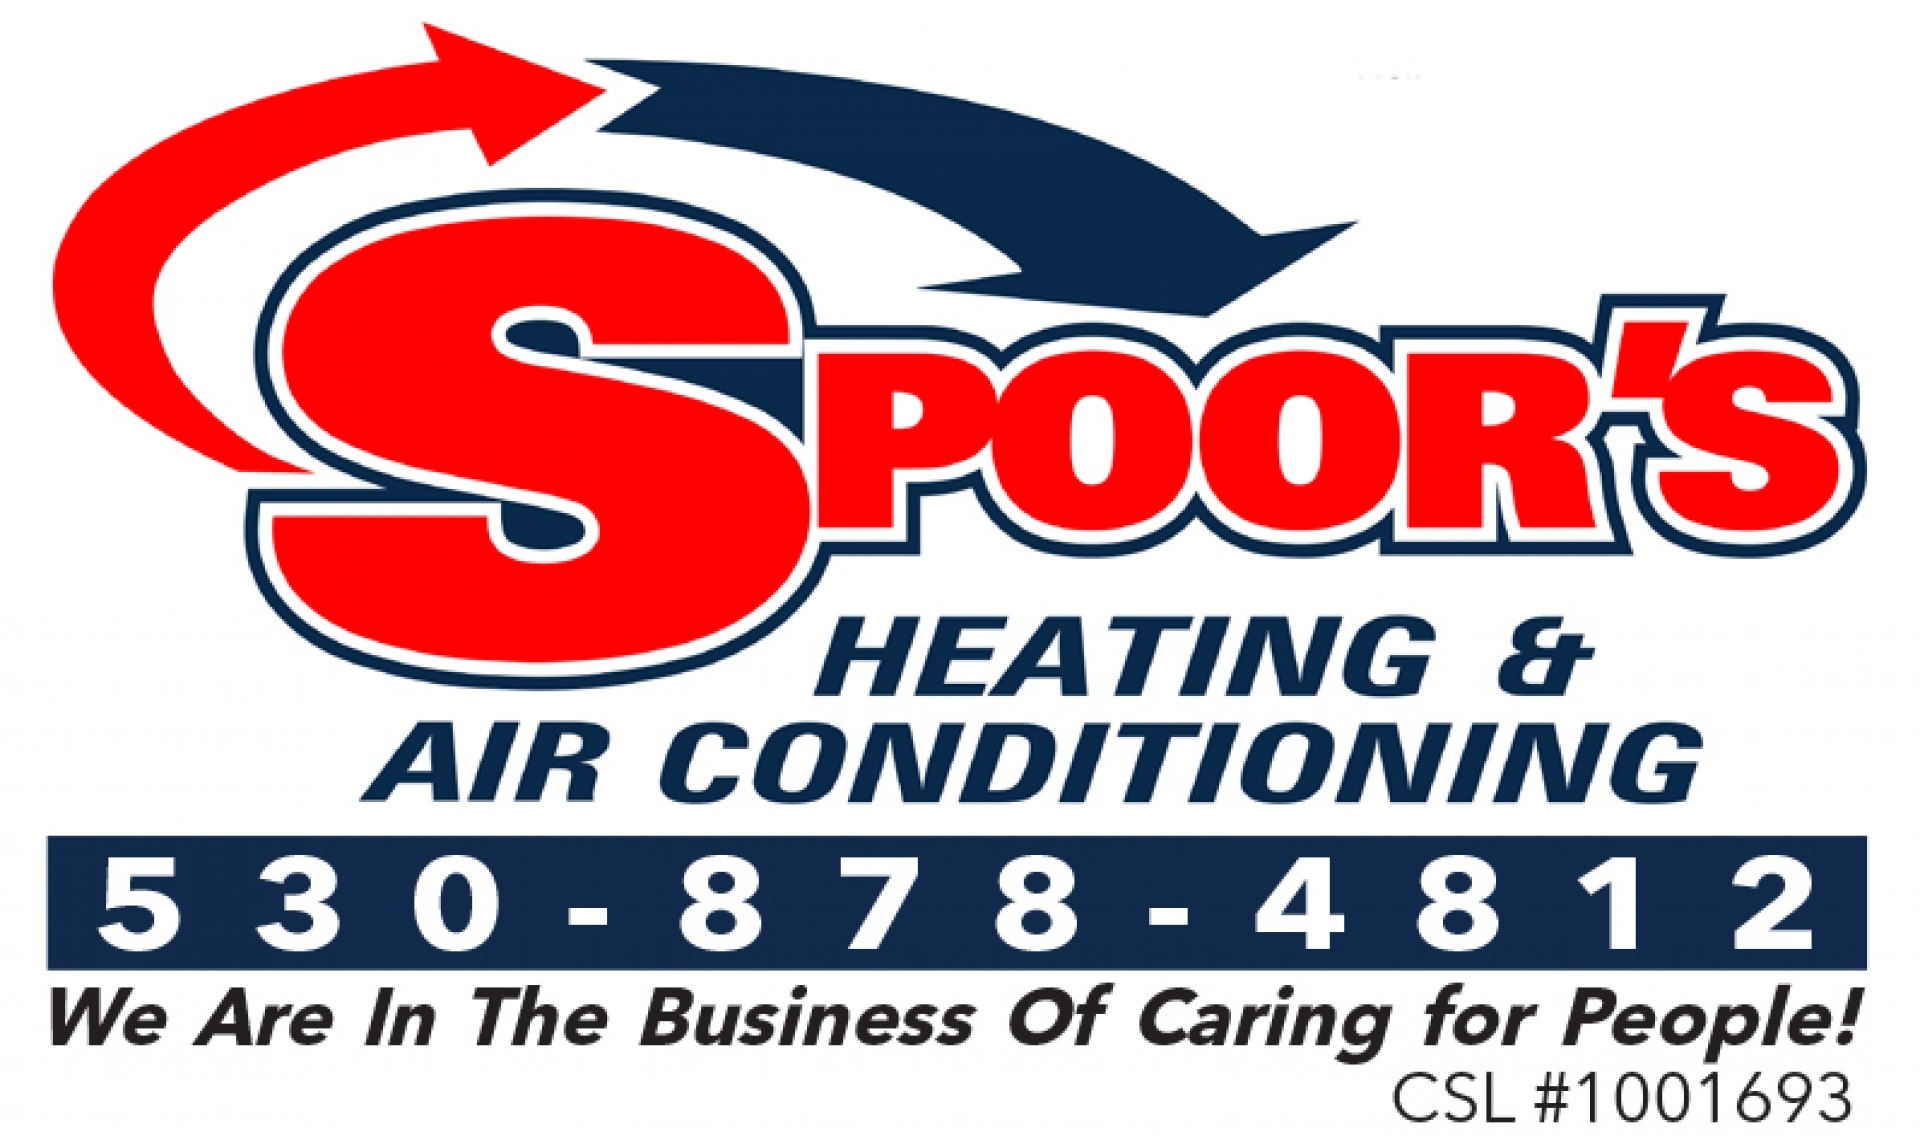 Spoor's Heating & Air Conditioning Inc. company logo